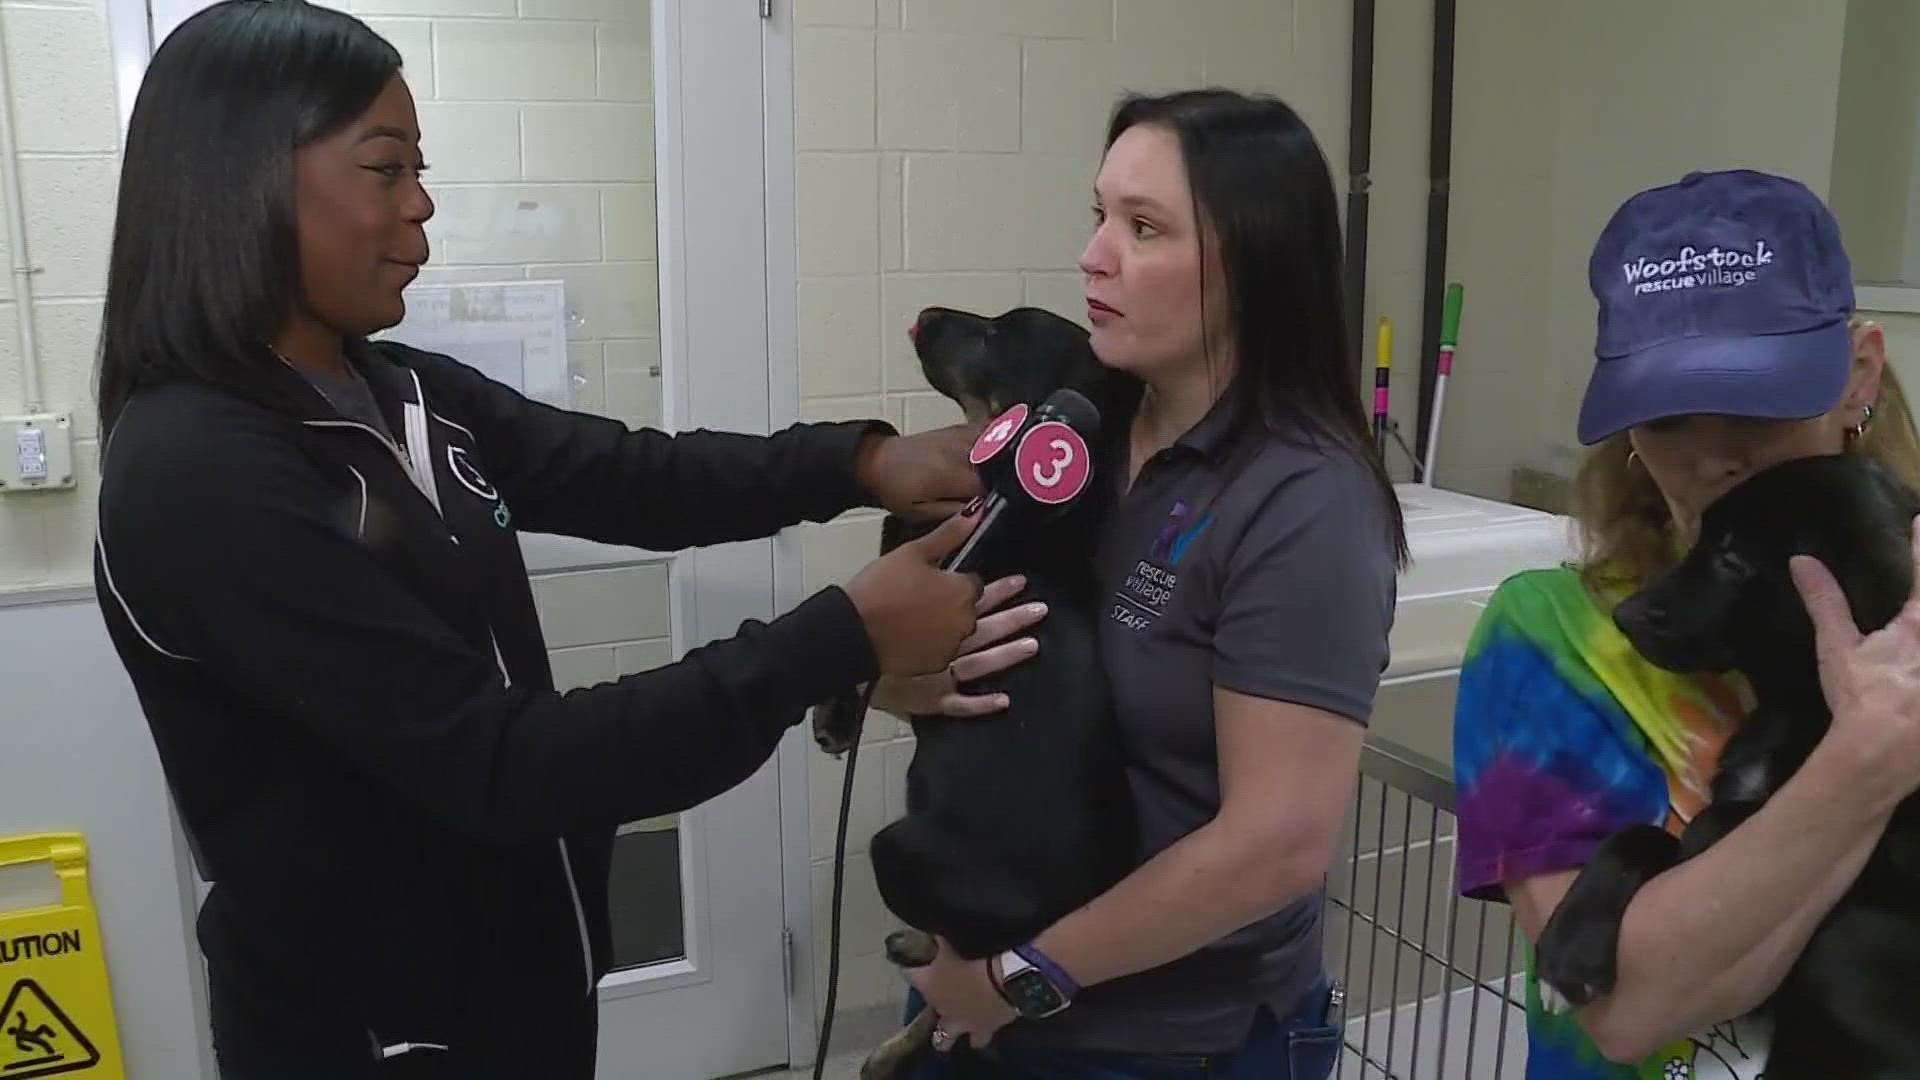 3News' Kierra Cotton visited Rescue Village where four legged friends are waiting to be adopted!